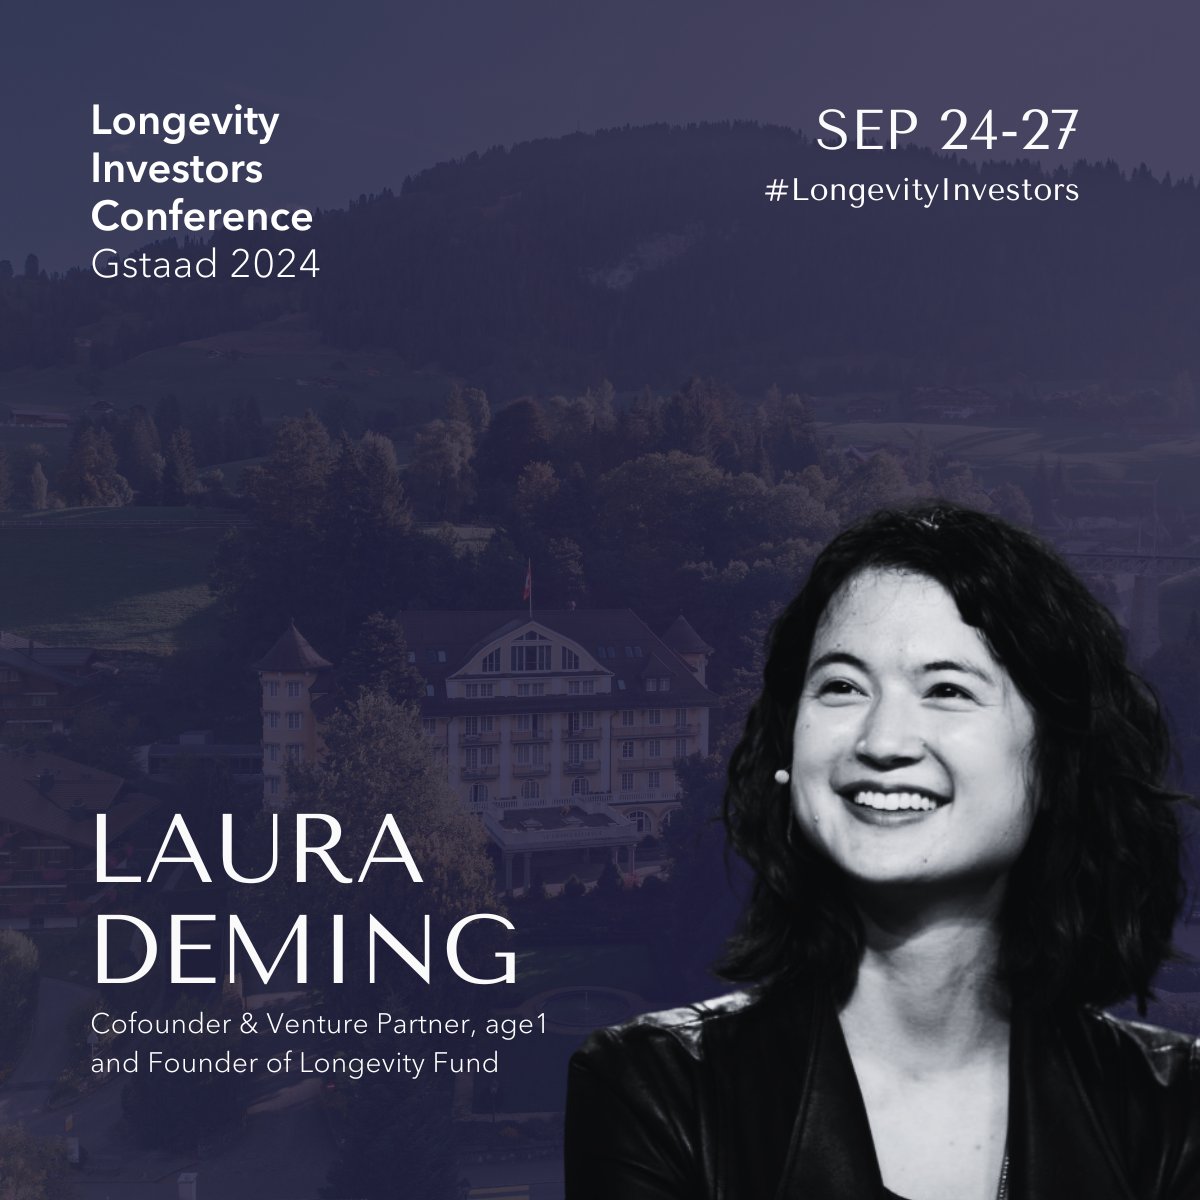 We're thrilled to announce @LauraDeming, Co-Founder and Venture Partner at age1, as a speaker at the Longevity Investors Conference 2024 in @BellevueGstaad, September 24-27. 🌟 At just 17, she founded the Longevity Fund, pioneering the longevity-focused venture capital space. 🌱…